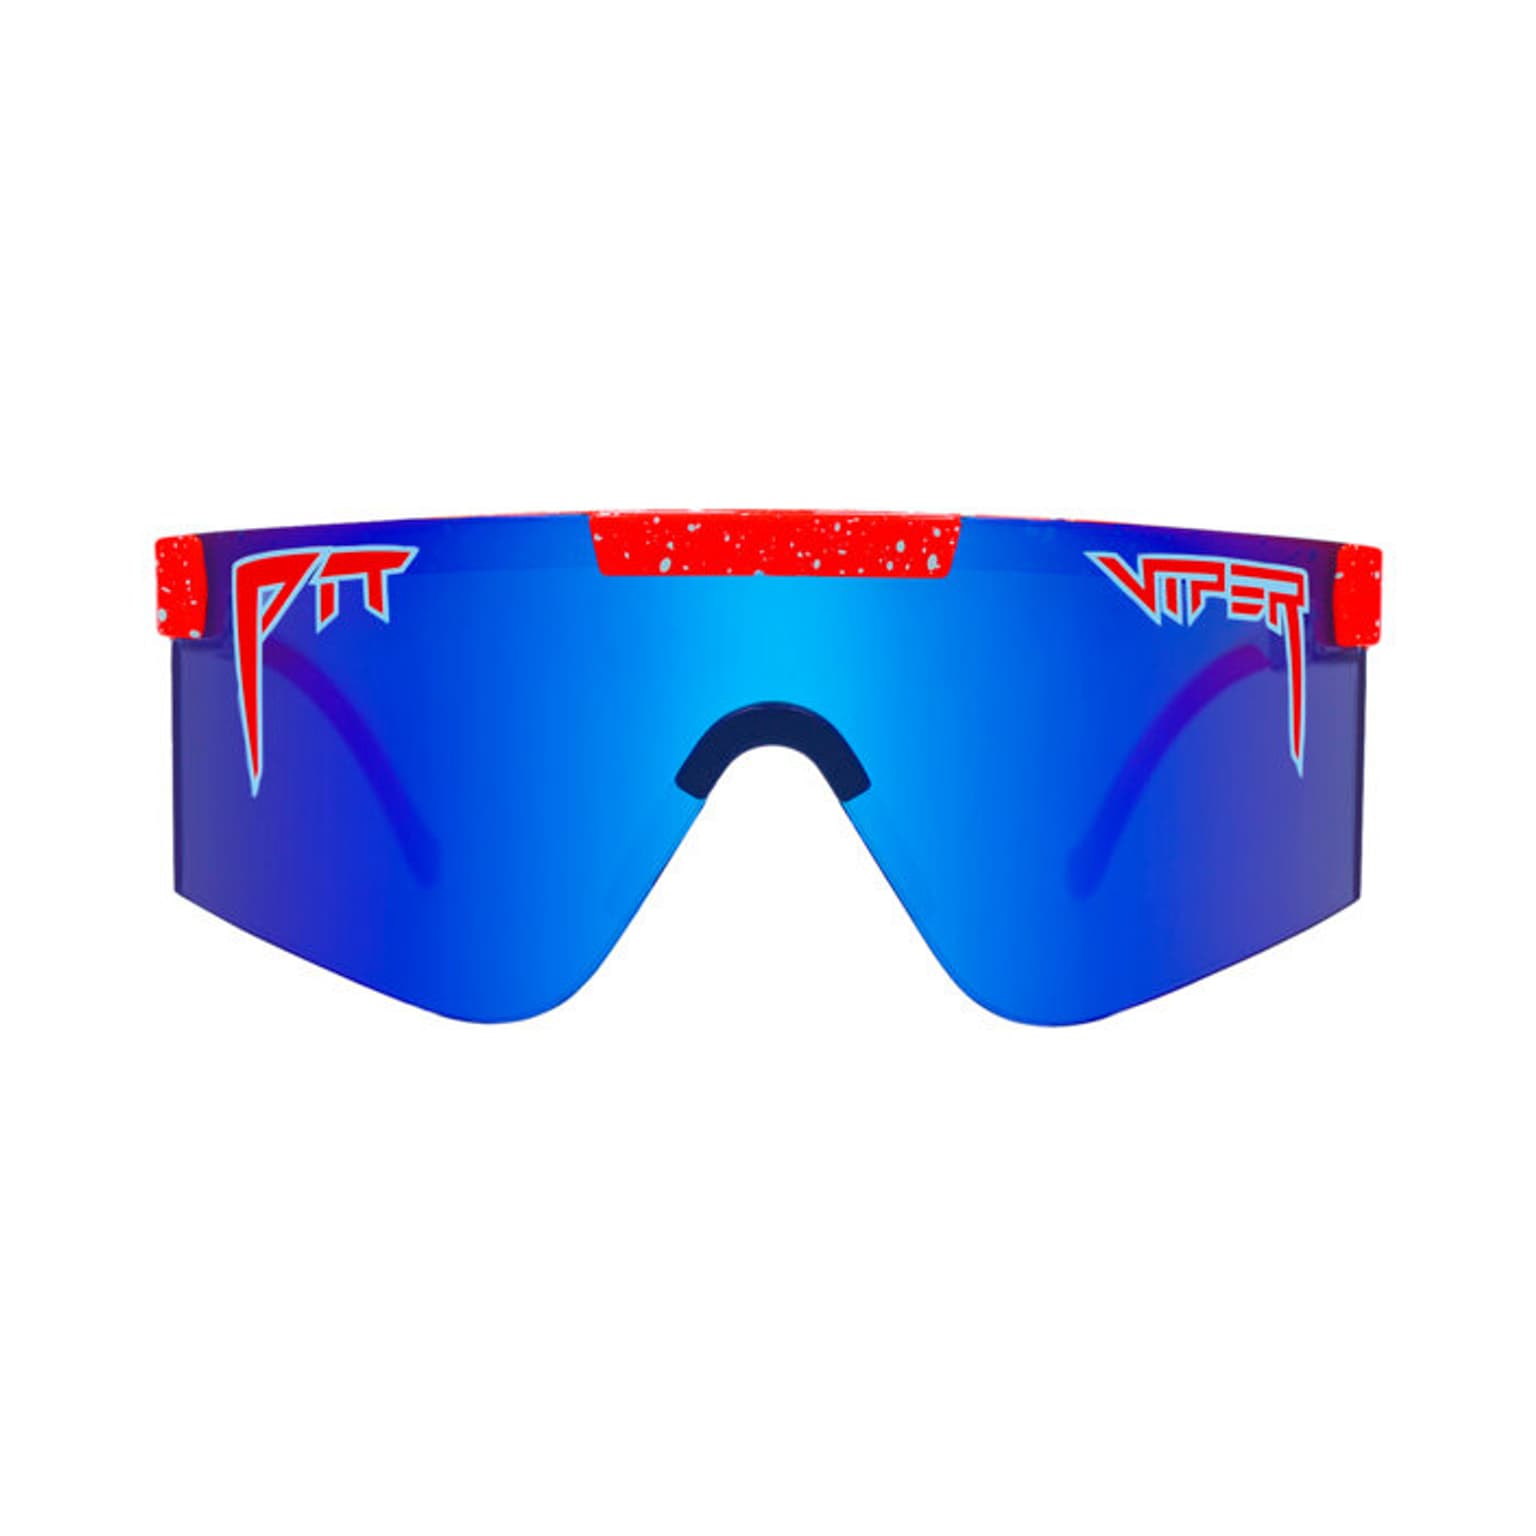 Pit Viper Pit Viper The 2000's The Basketball Team Sportbrille 2